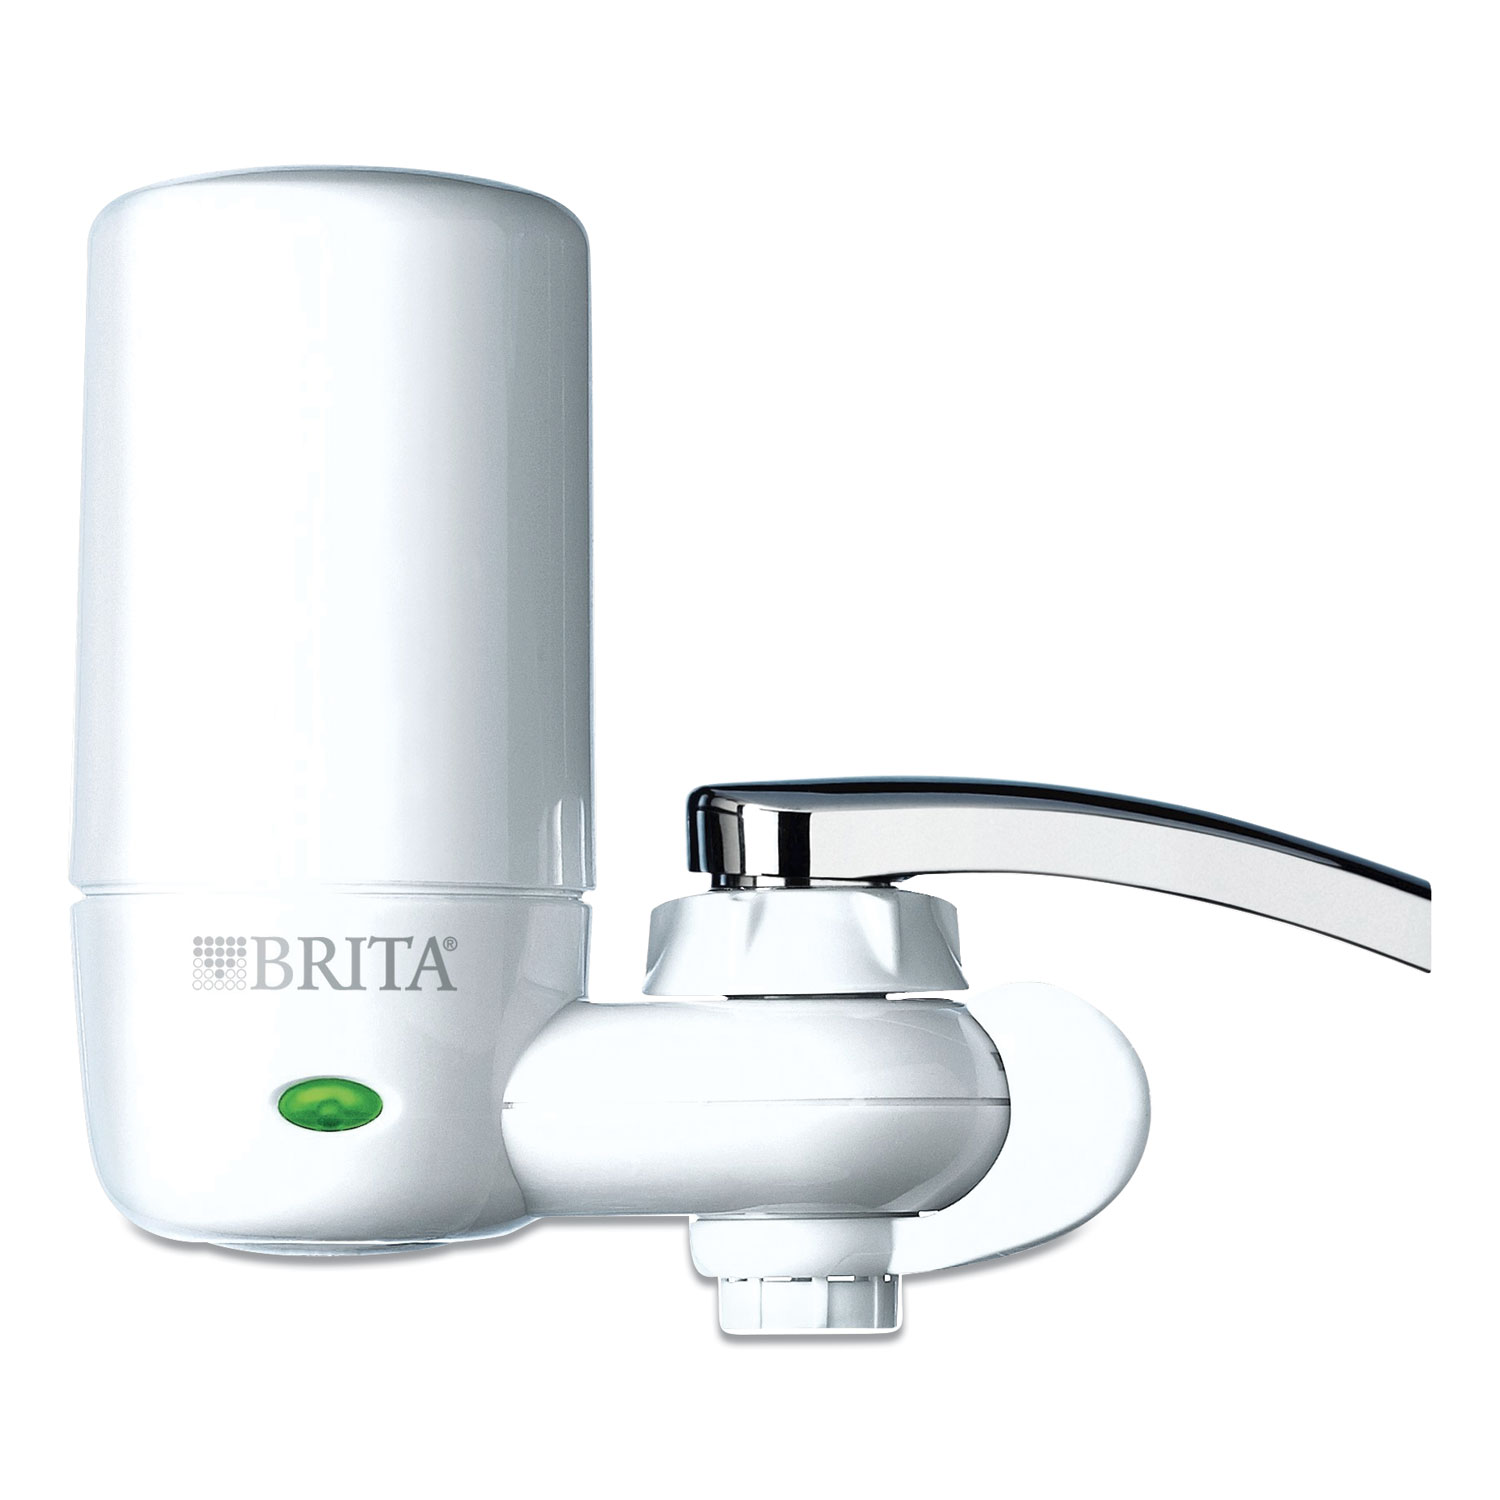  Brita CLO42201CT On Tap Faucet Water Filter System, White, 4/Carton (CLO42201CT) 